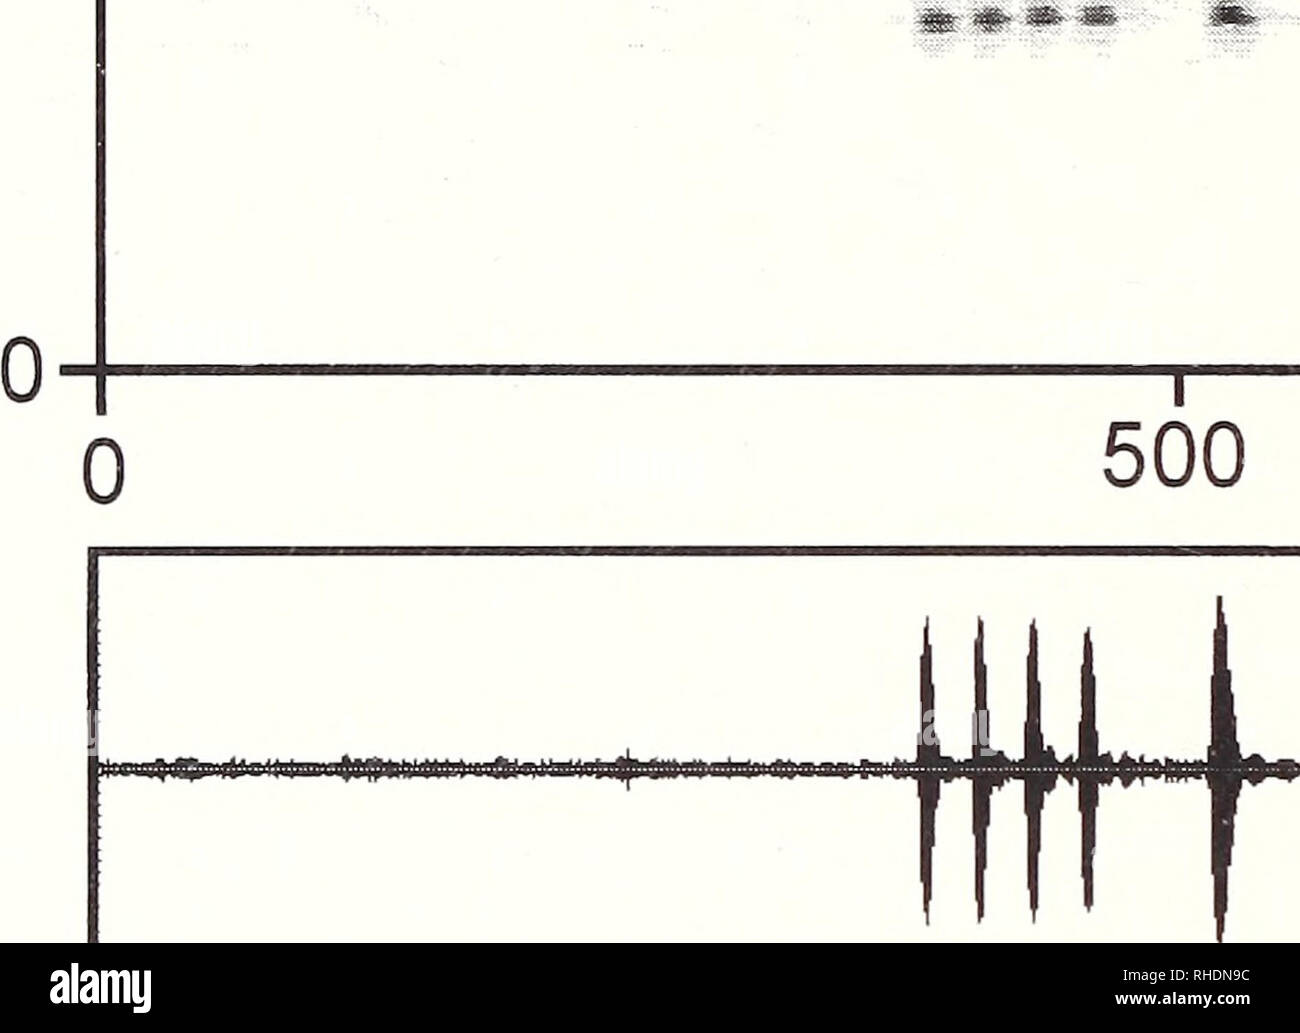 . Bonner zoologische Monographien. Zoology. 88 Frequency (kHz) 10t 5-. 1000 ms 1 0 500 1000 ms Fig.23: Audiospectrogram and oscillogram of the advertisement call of Coclvanella bejaranoi from a point north of Remates, P.N. Amboro, 2300 m a.s.l. Recording obtained on 2 January 1998. Air temperature 14.1°C. clefts and were approximately 40 mm in diameter and 10 mm in thickness. One clutch contained 21 developing larvae. Vo c a 1 i z a t i o n : Advertisement calls were recorded on 2 January 1998 noith of Remates, Parque Nacional Amboro, Provincia Florida, Depaitamento Santa Cnaz, 2300 m a.s.l. C Stock Photo